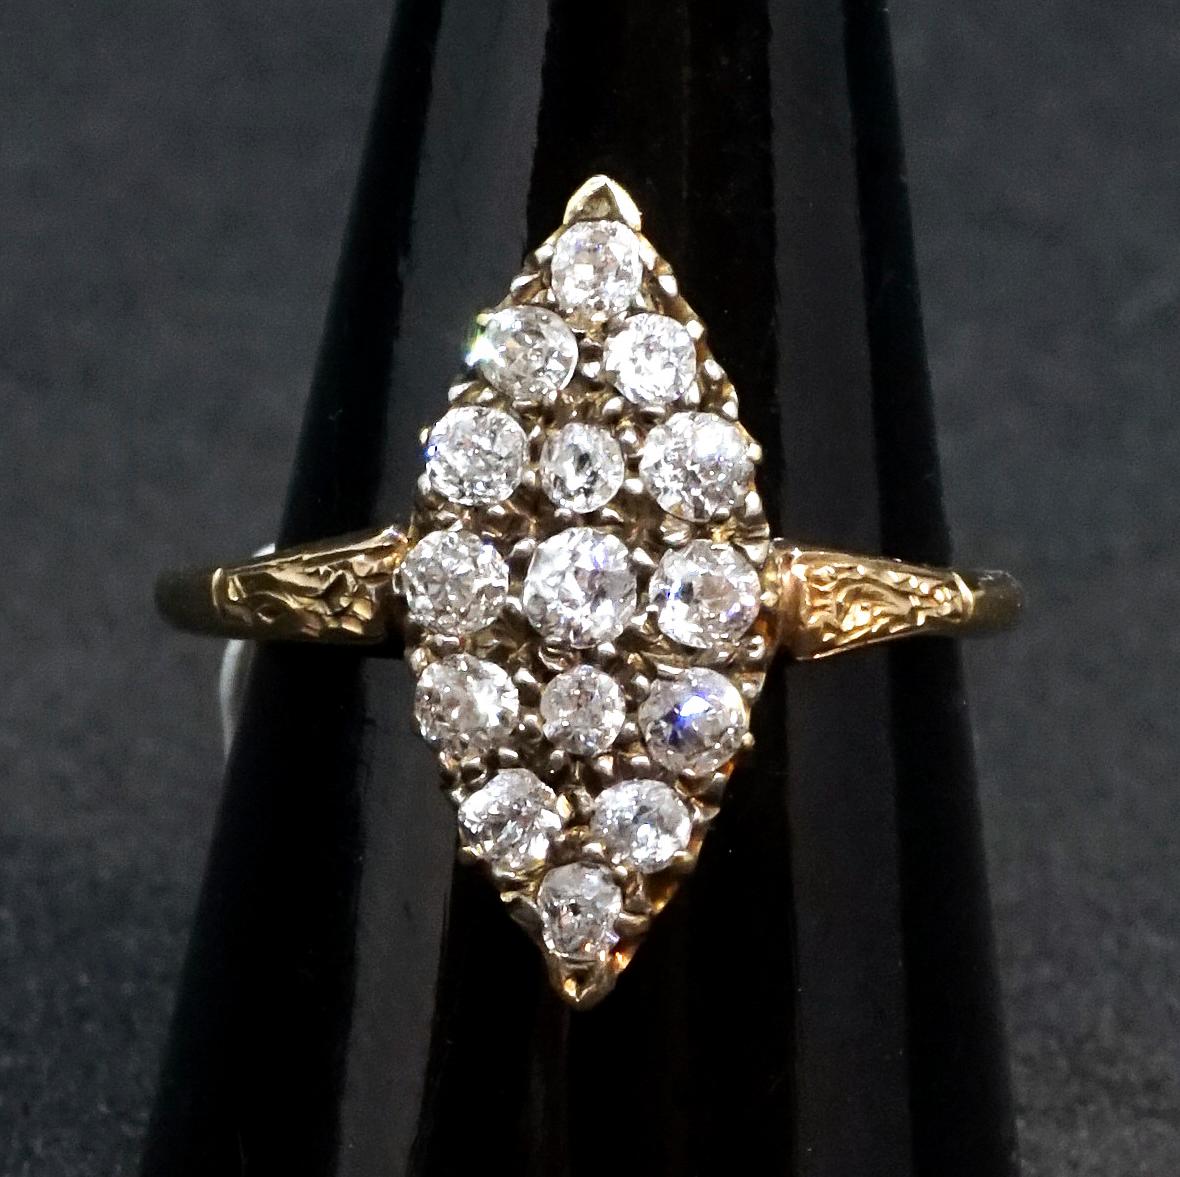 Antique navette-shaped old brilliant-cut diamond ring, fifteen old brilliant-cut diamonds in a cluster, all diamonds estimated to weigh a total of 1.2 carats, claw set in a rose gold mount with engraved shoulders.
 
Austria, circa 1890

head